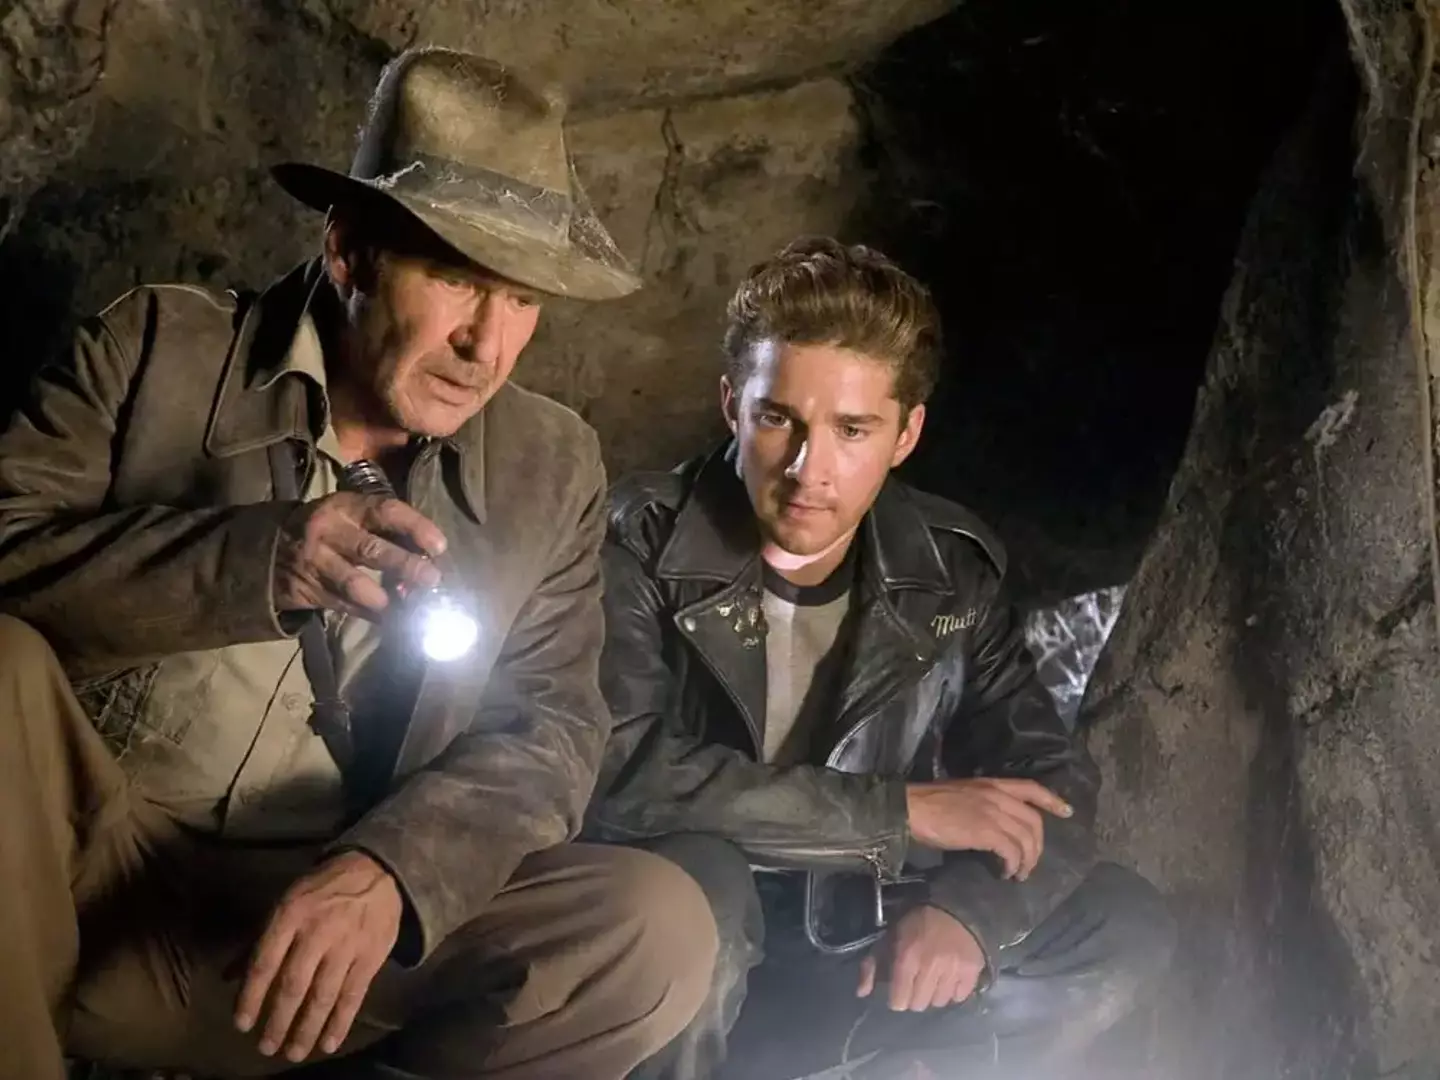 Shia LaBeouf didn't reprise his role for Indiana Jones 5.